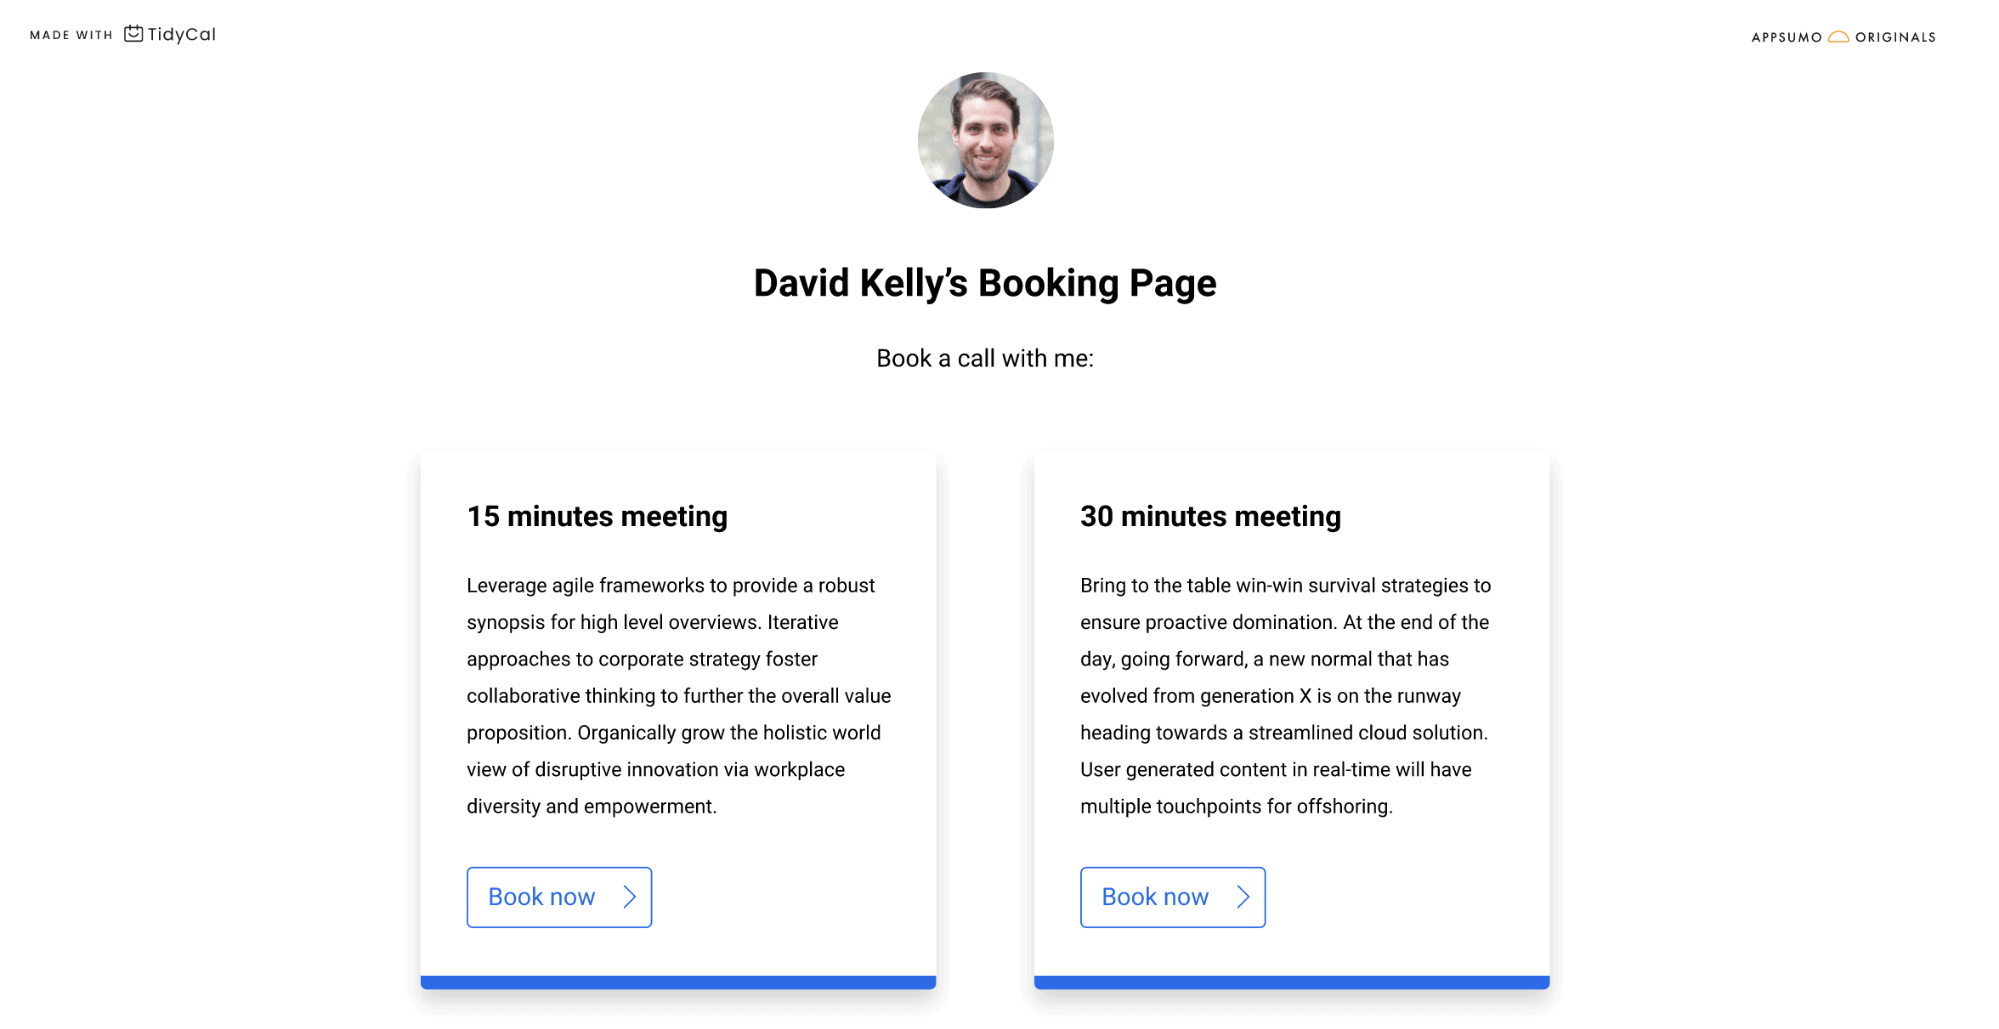 David Kelly's Booking Pages